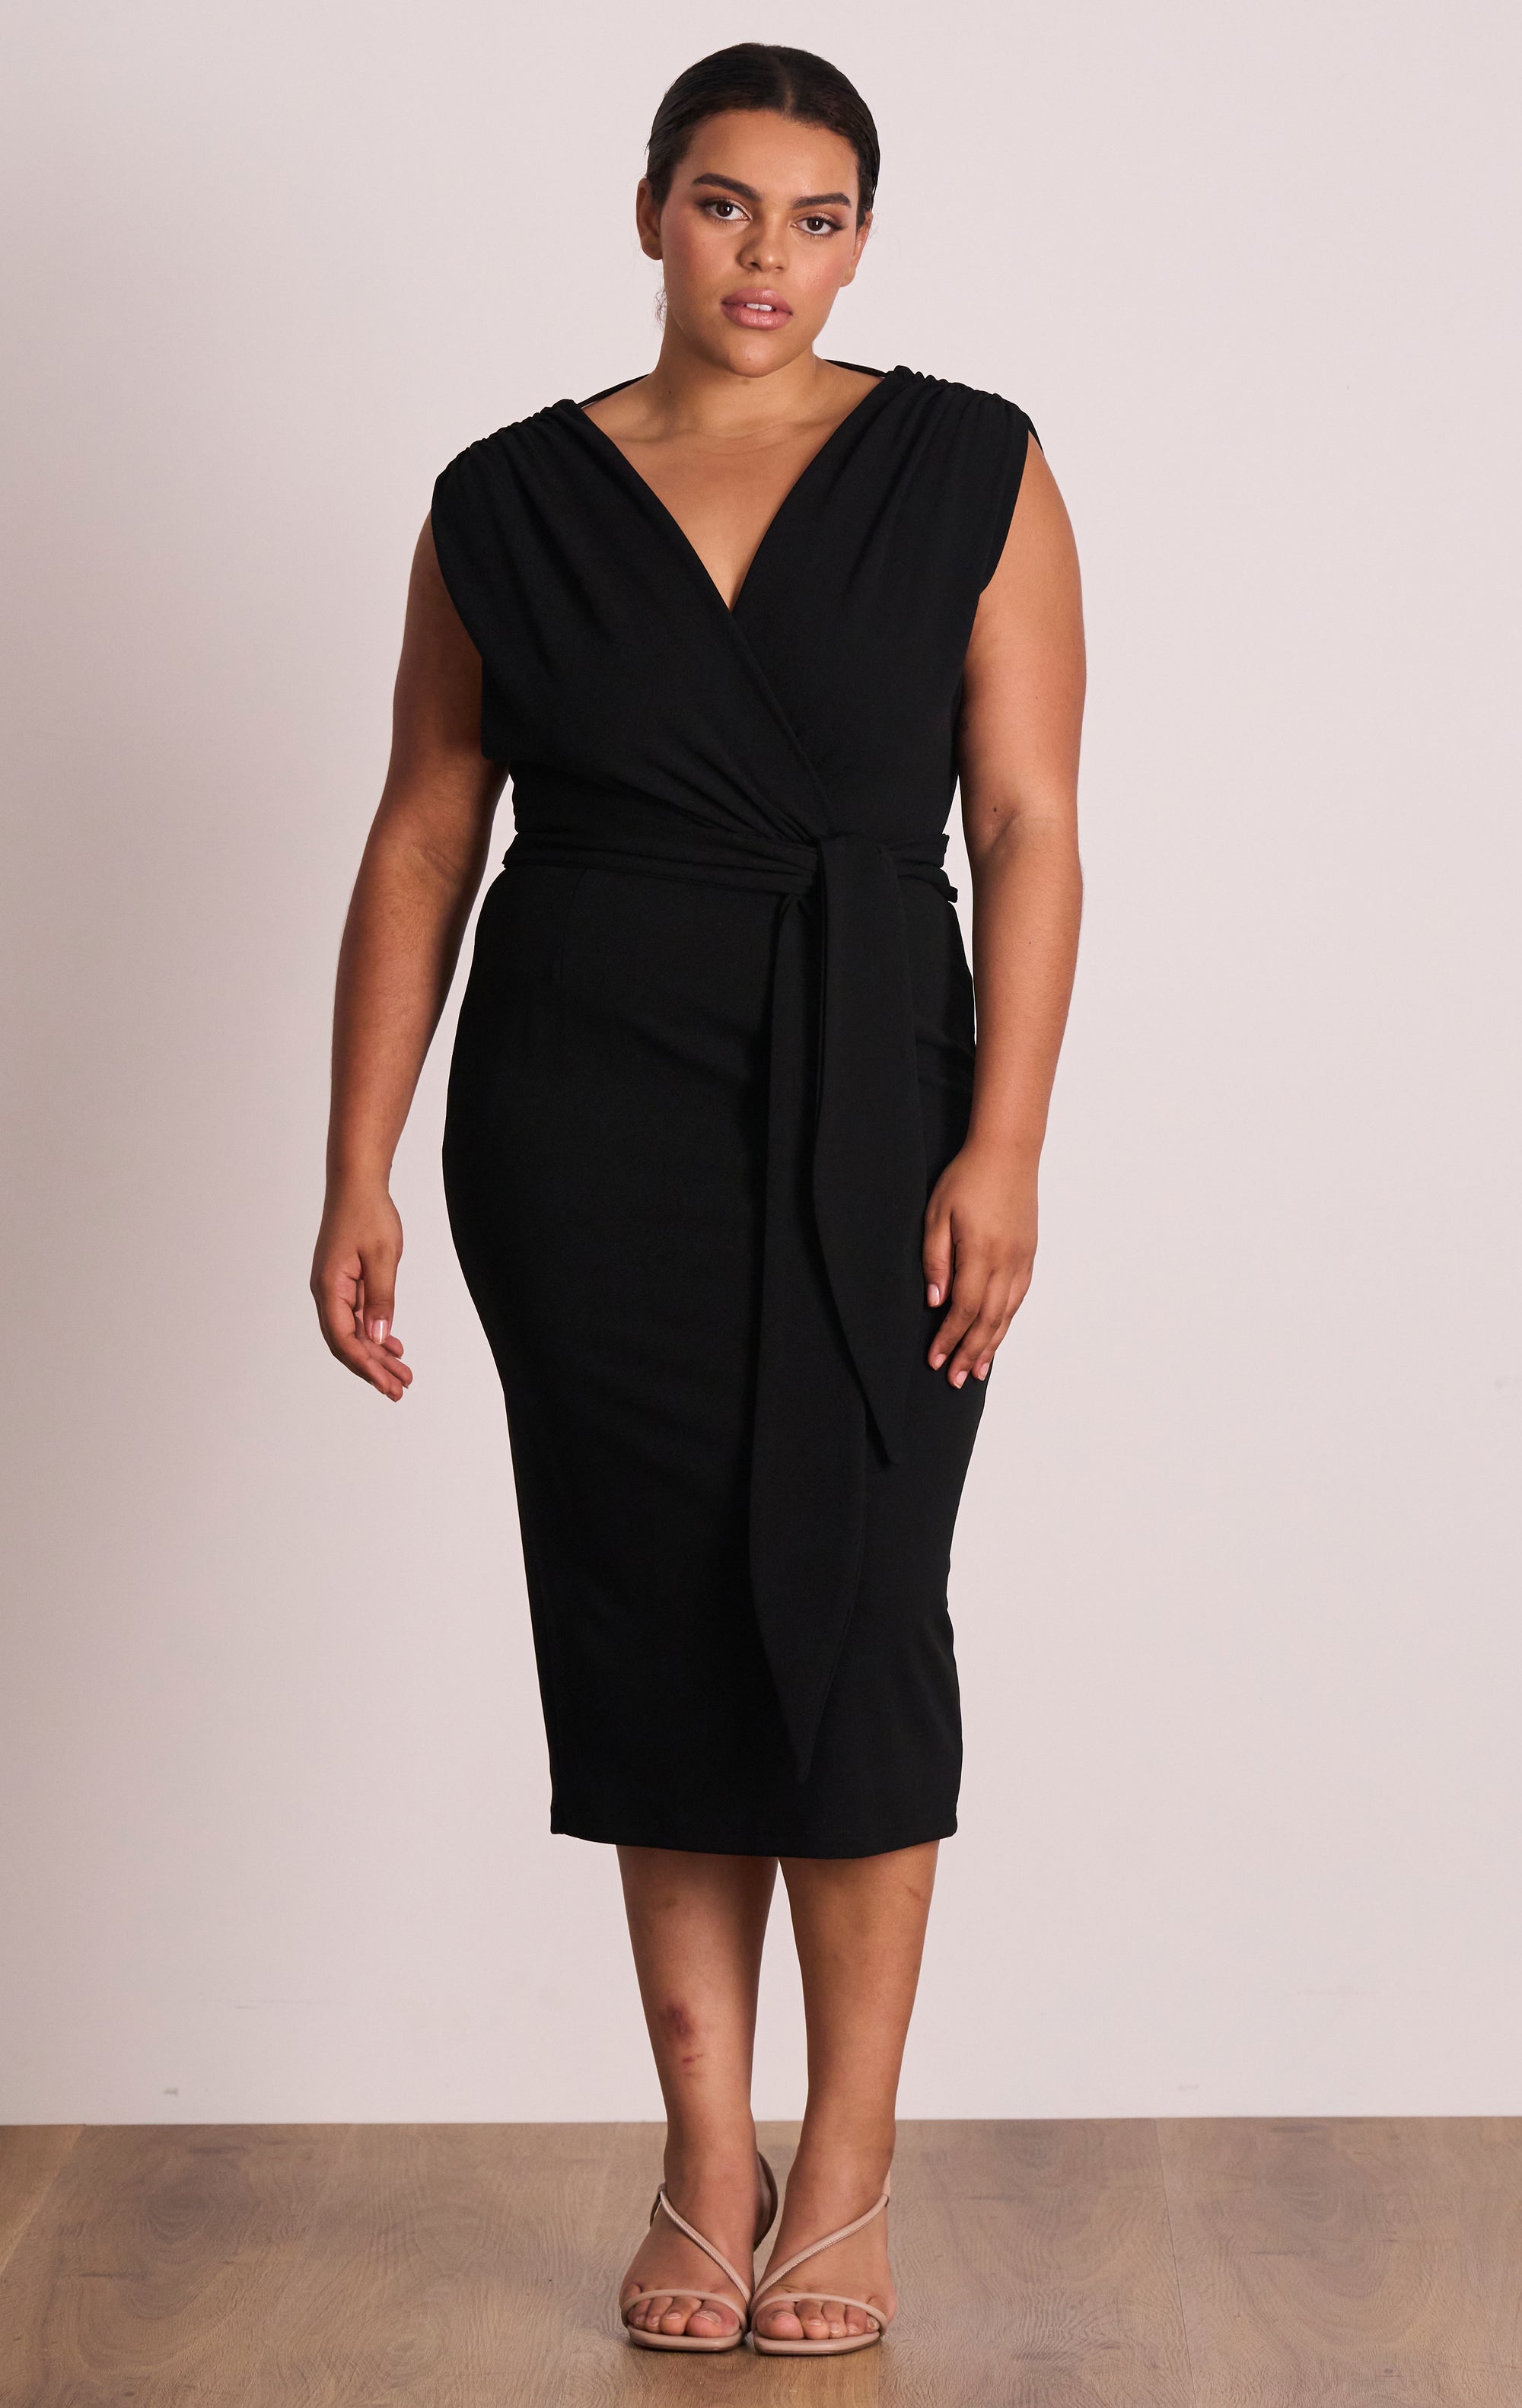 Radiance Midi - TAKE 40% OFF DISCOUNT APPLIED AT CHECKOUT